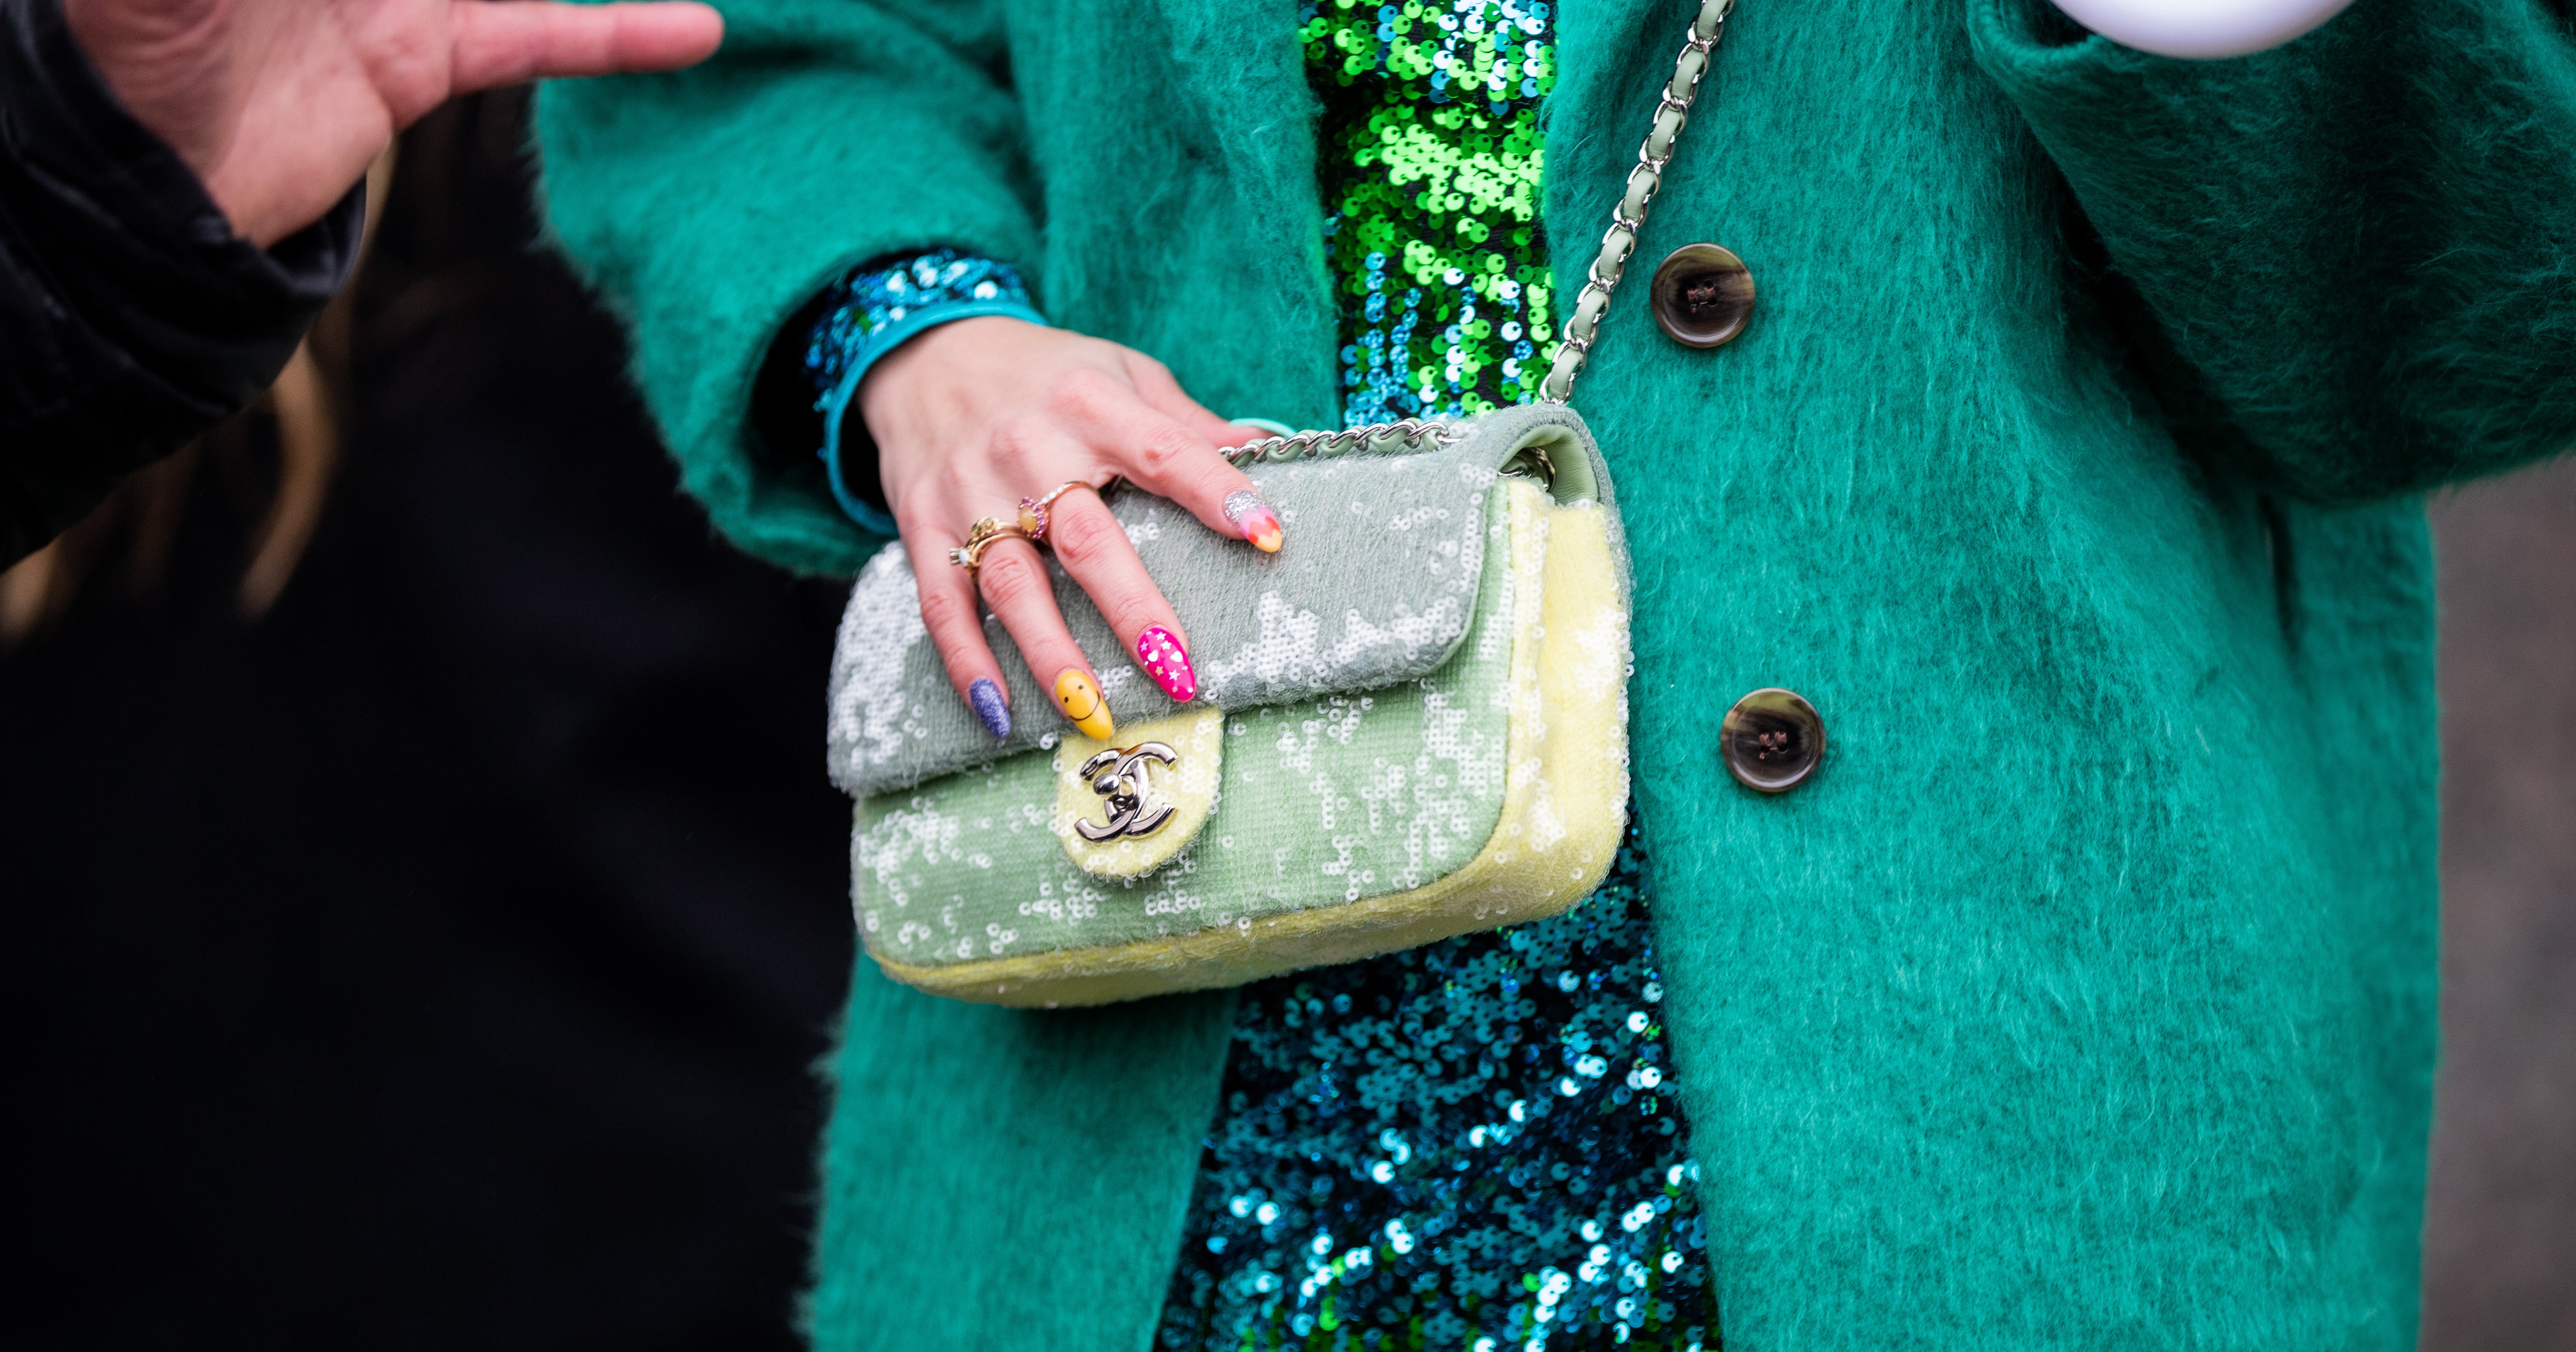 Rhinestones & Sequins Are The Maximalist Trends We're Following This Summer